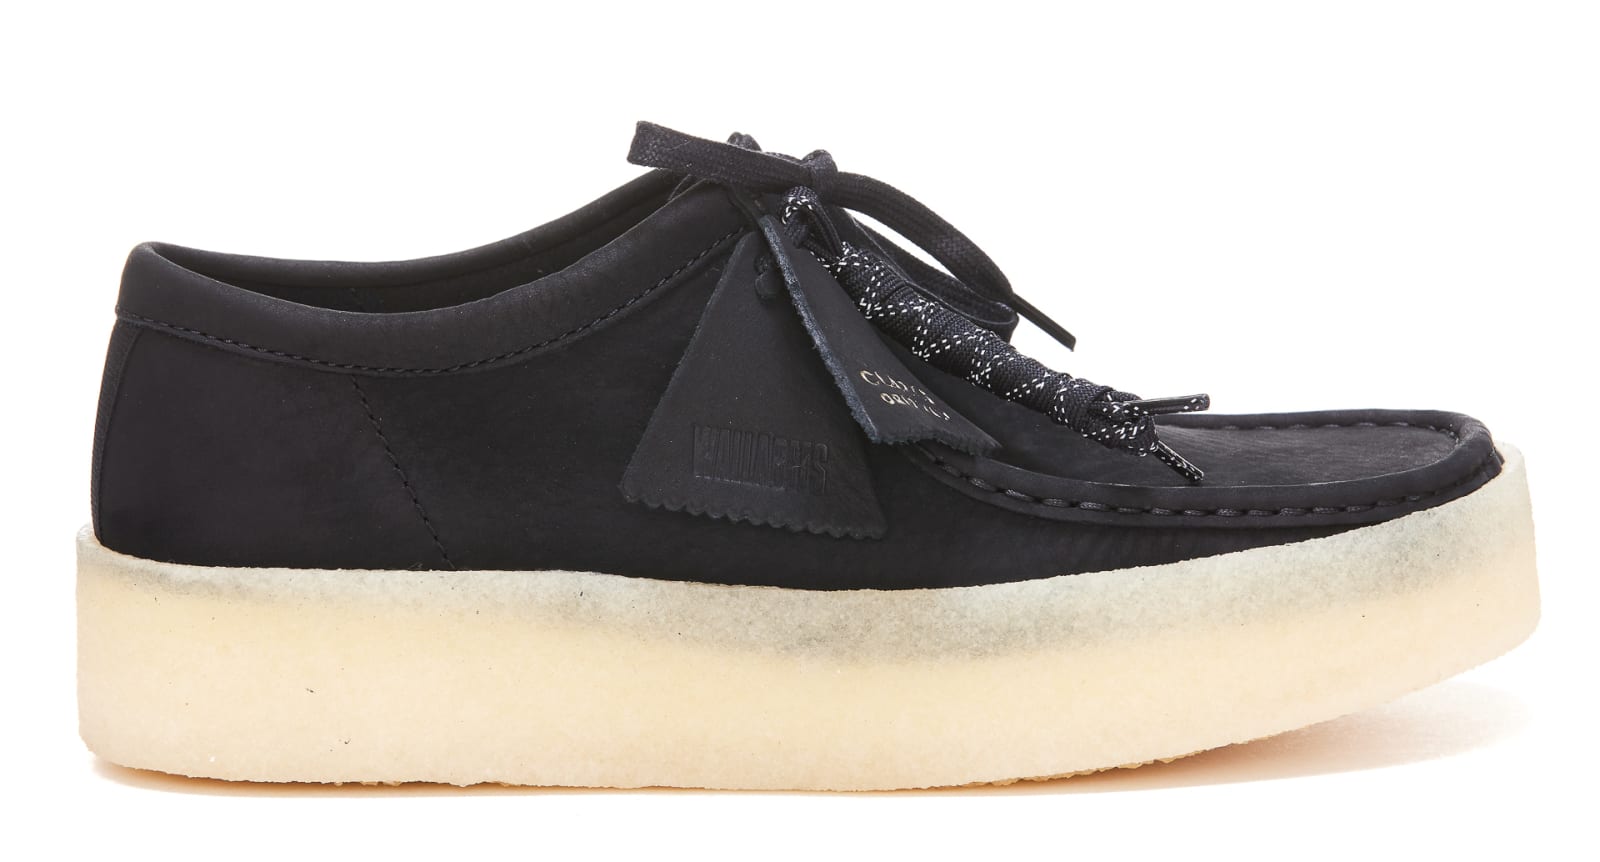 Clarks Wallabee Lace Up Shoes